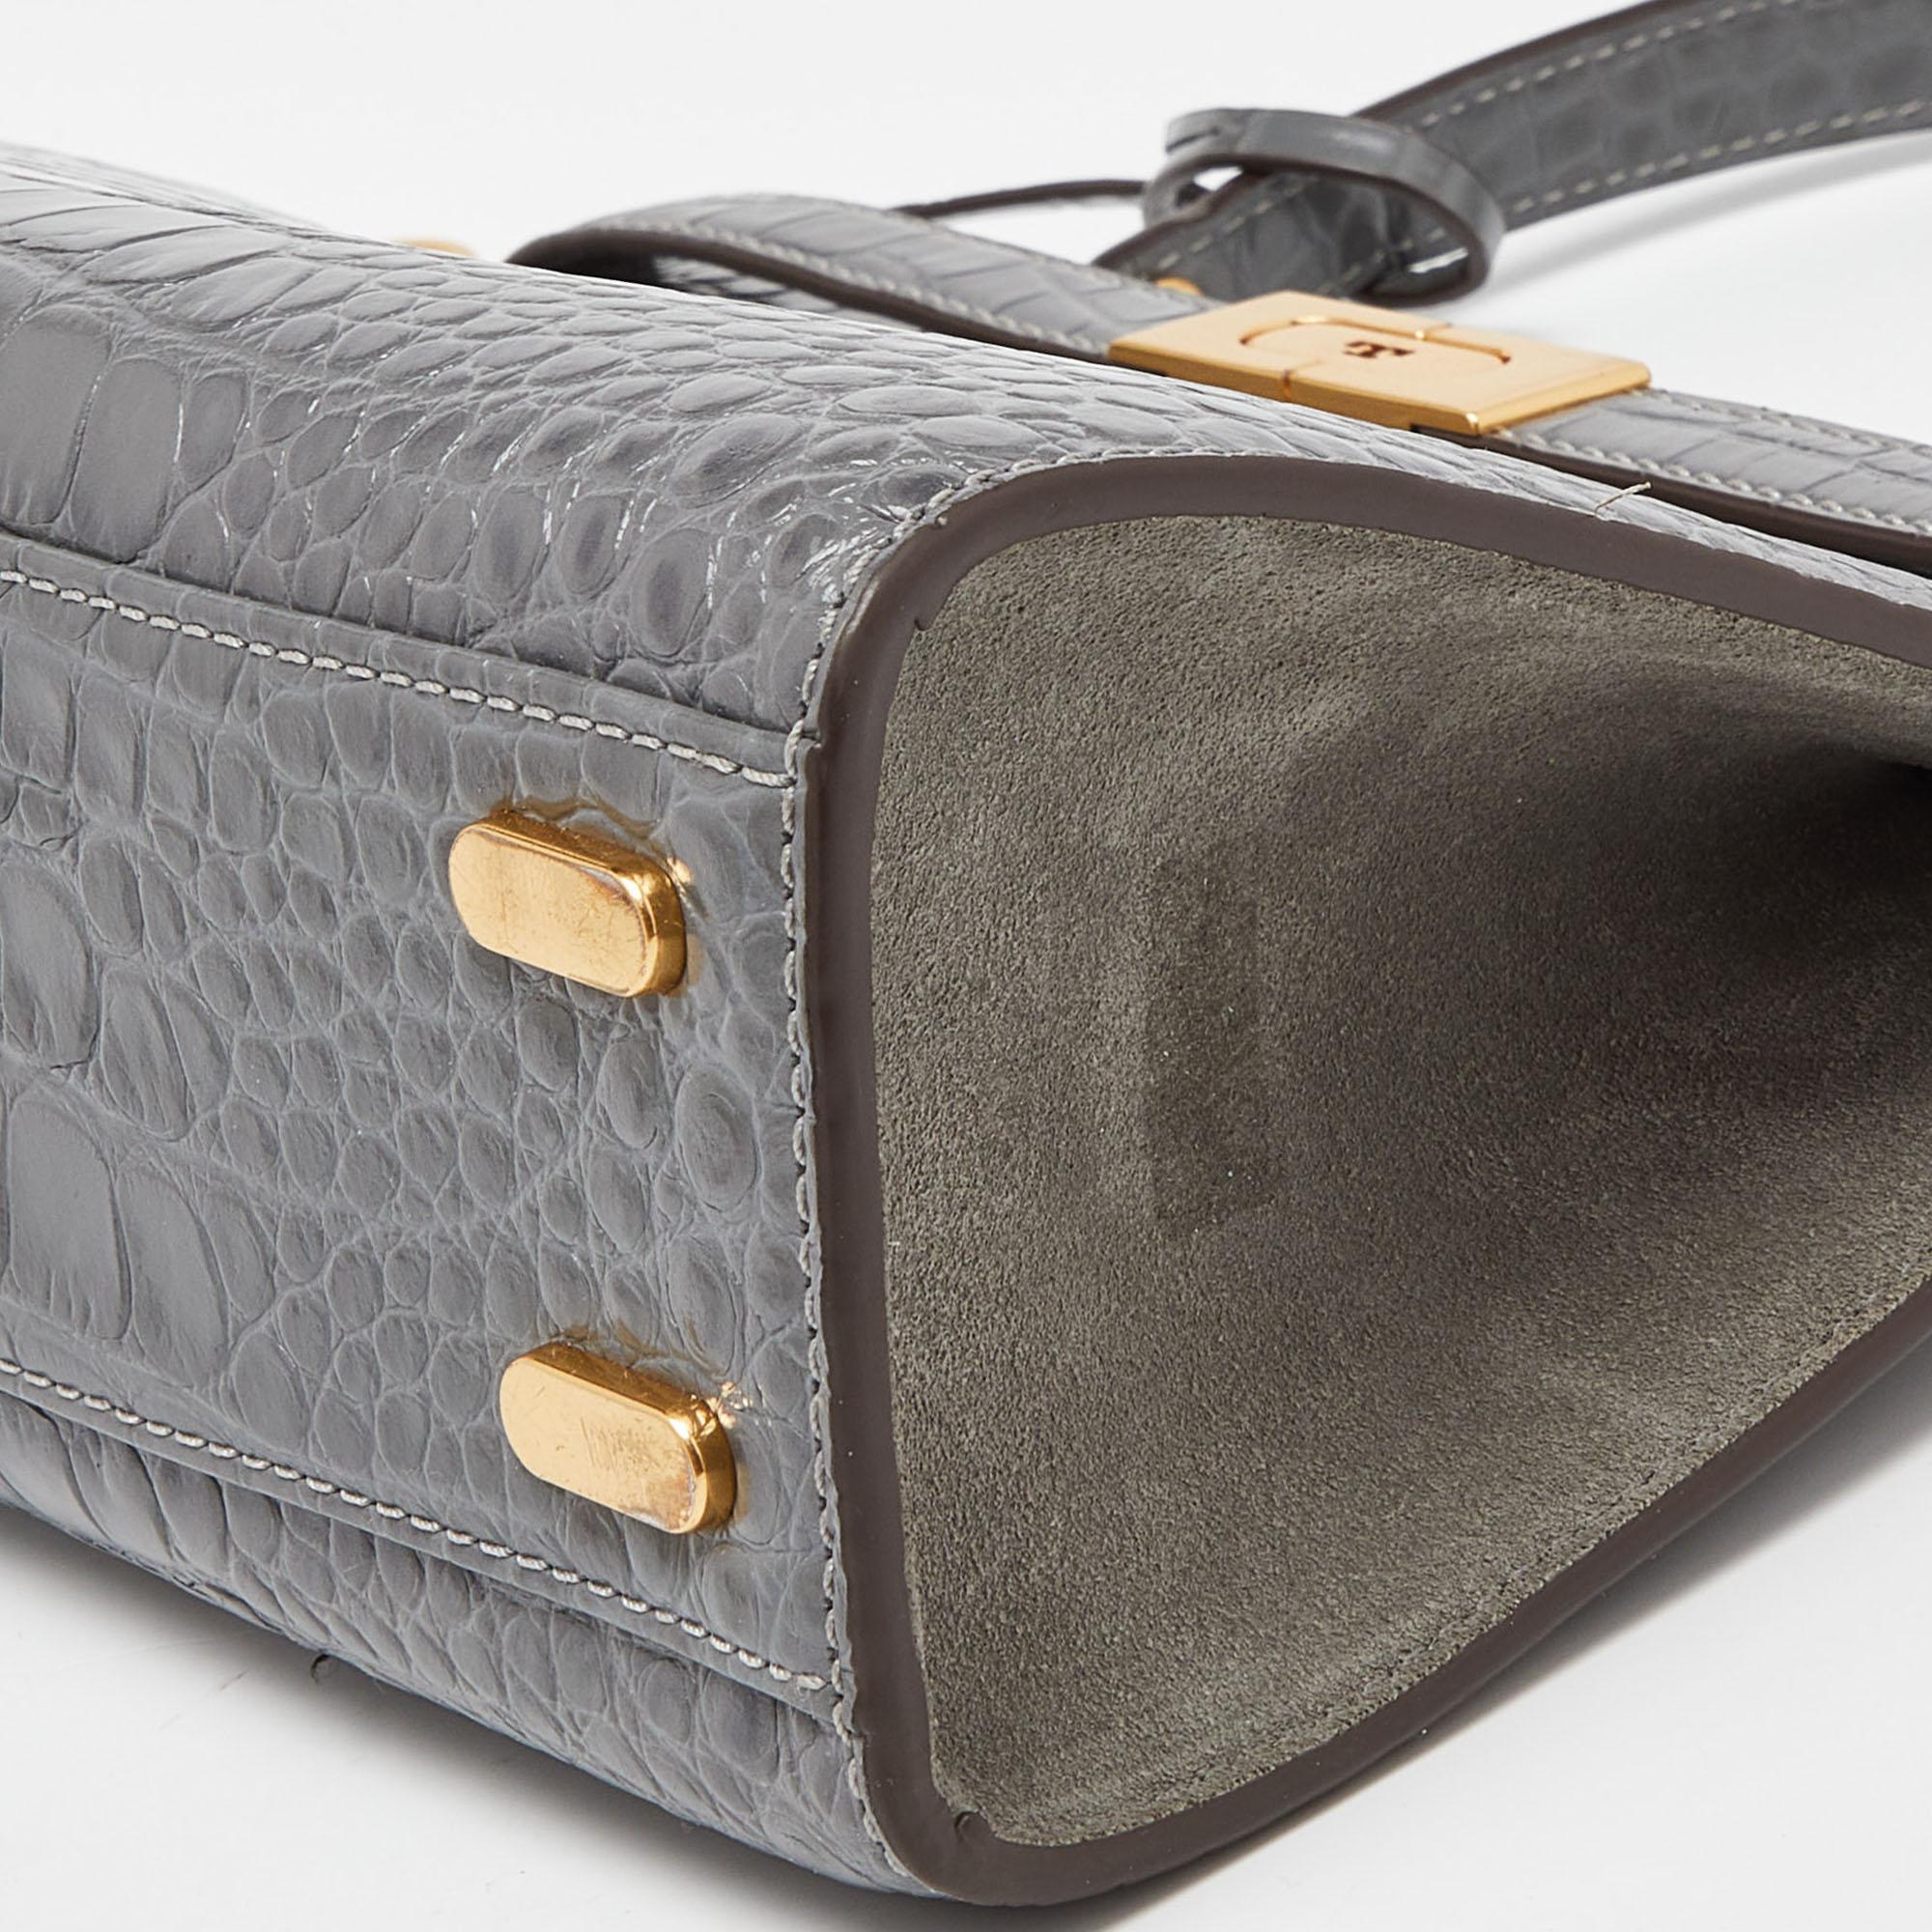 Tory Burch Grey Croc Embossed Leather Small Lee Radziwill Top Handle Bag 3